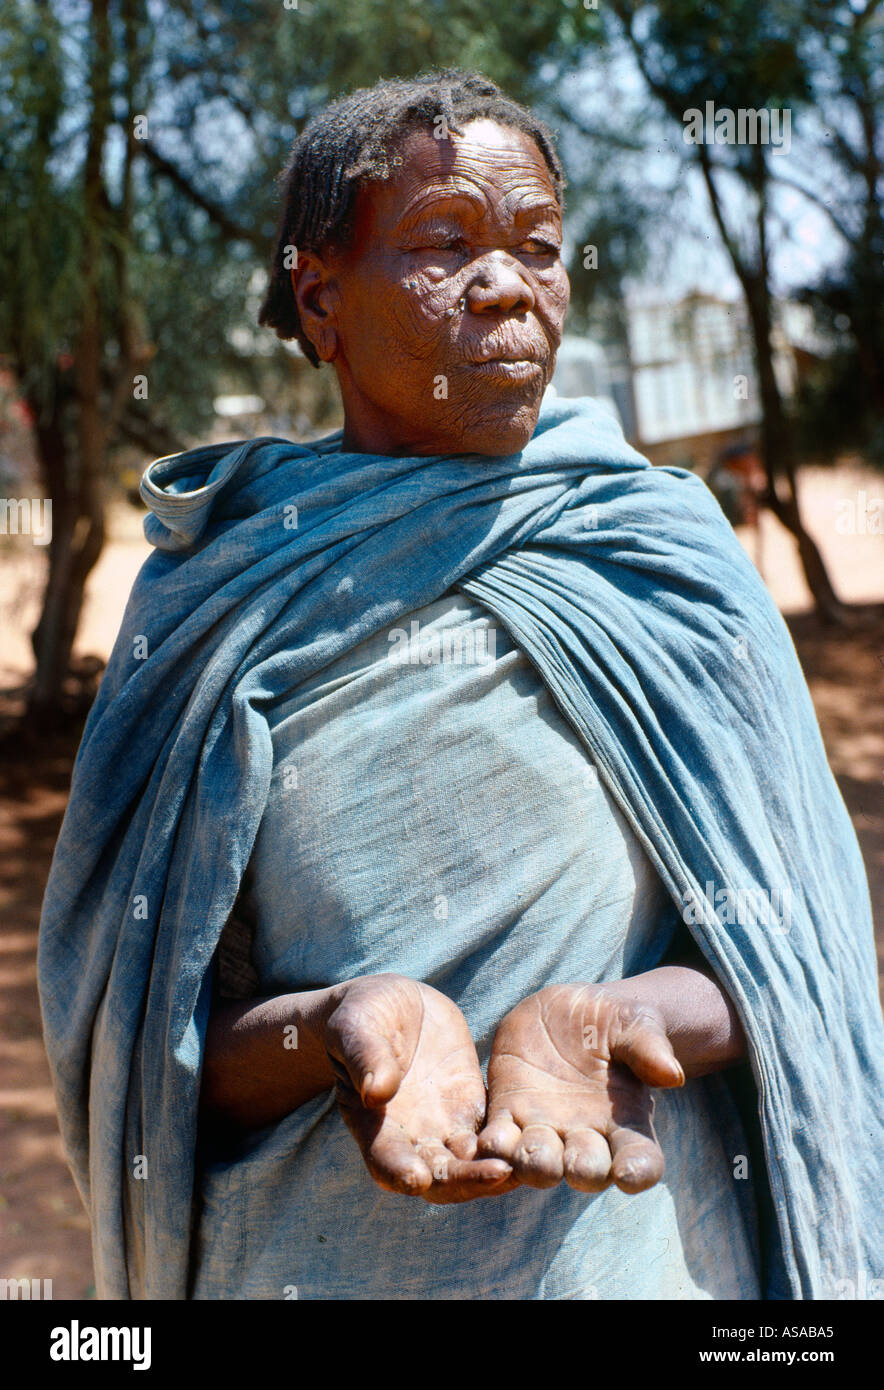 Sudan Woman With Leprosy Showing Hands Stock Photo